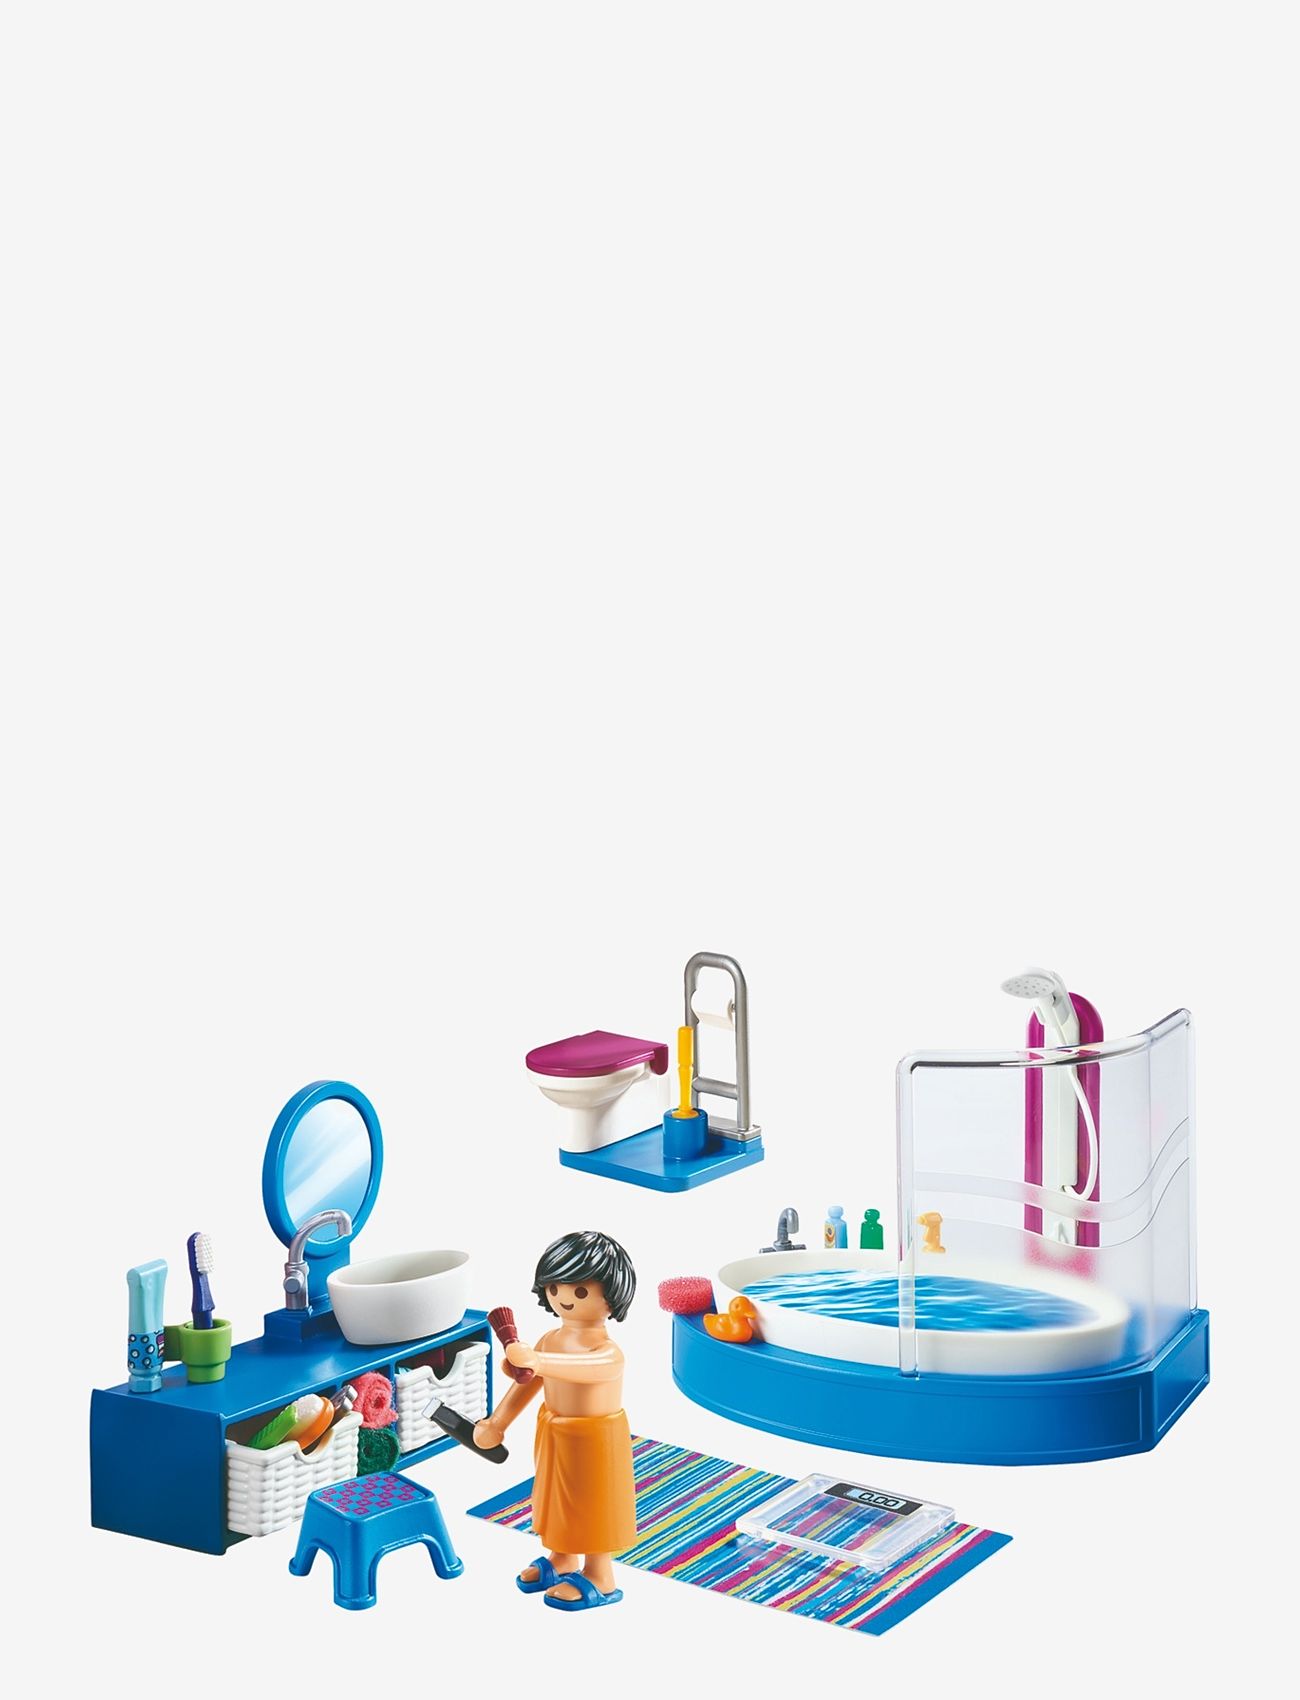 PLAYMOBIL - PLAYMOBIL Dollhouse Bathroom with Tub - 70211 - lowest prices - multicolored - 1